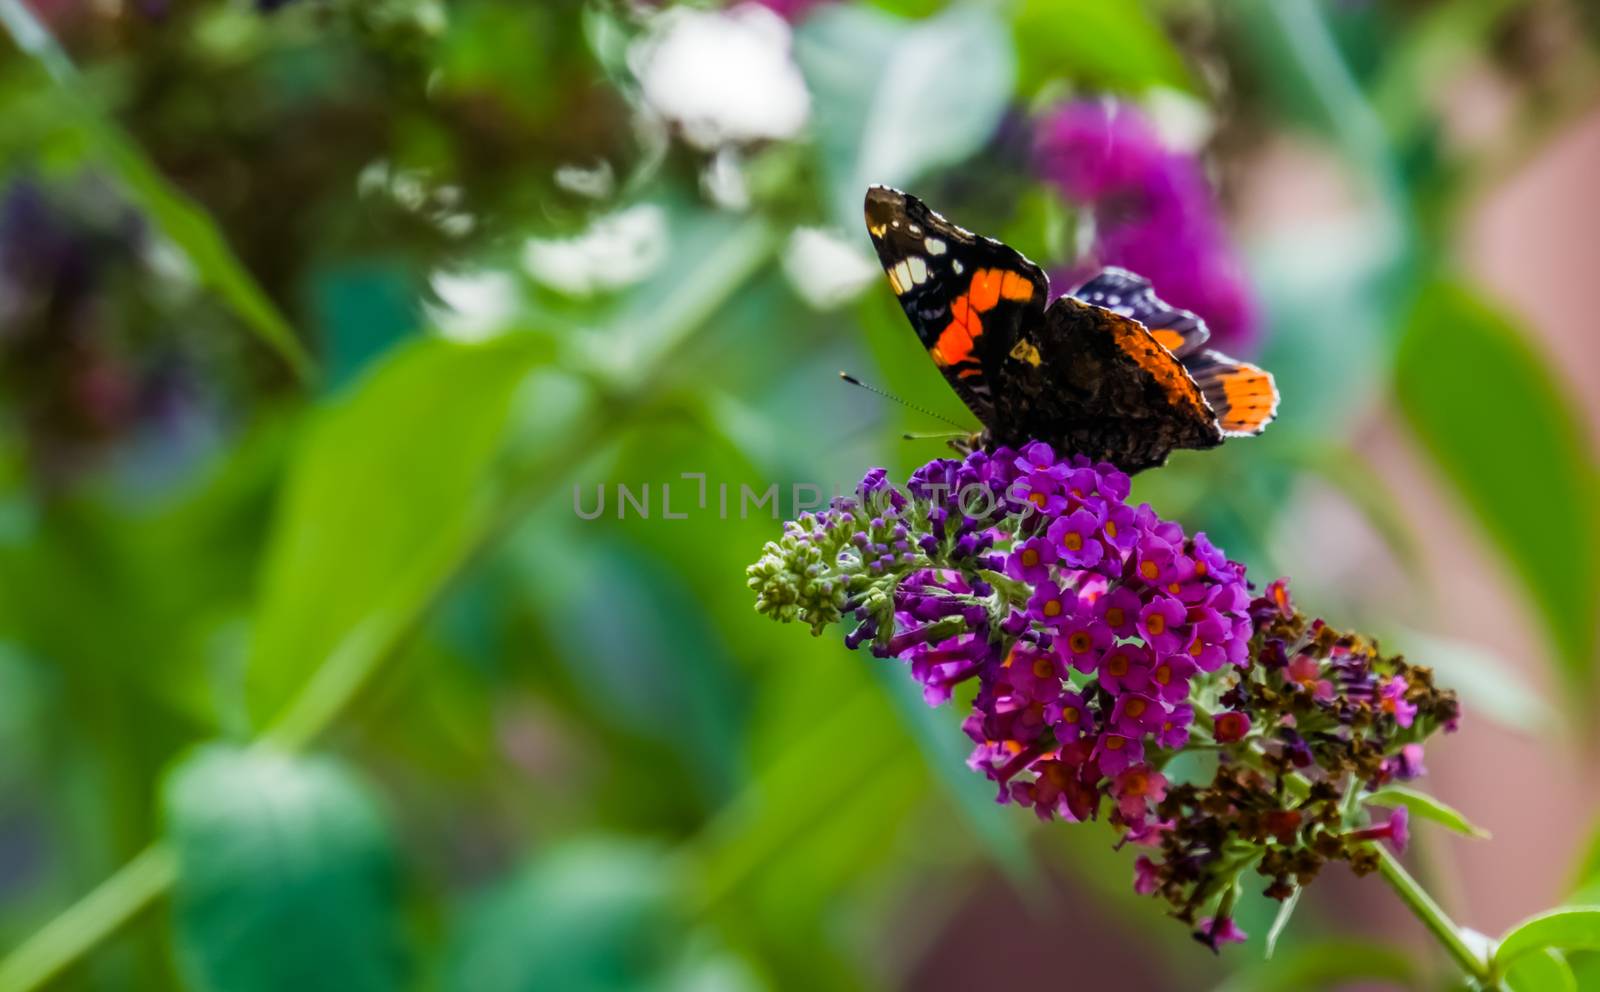 side view of a red admiral butterfly on a butterfly bush, common insect specie from Europe by charlottebleijenberg